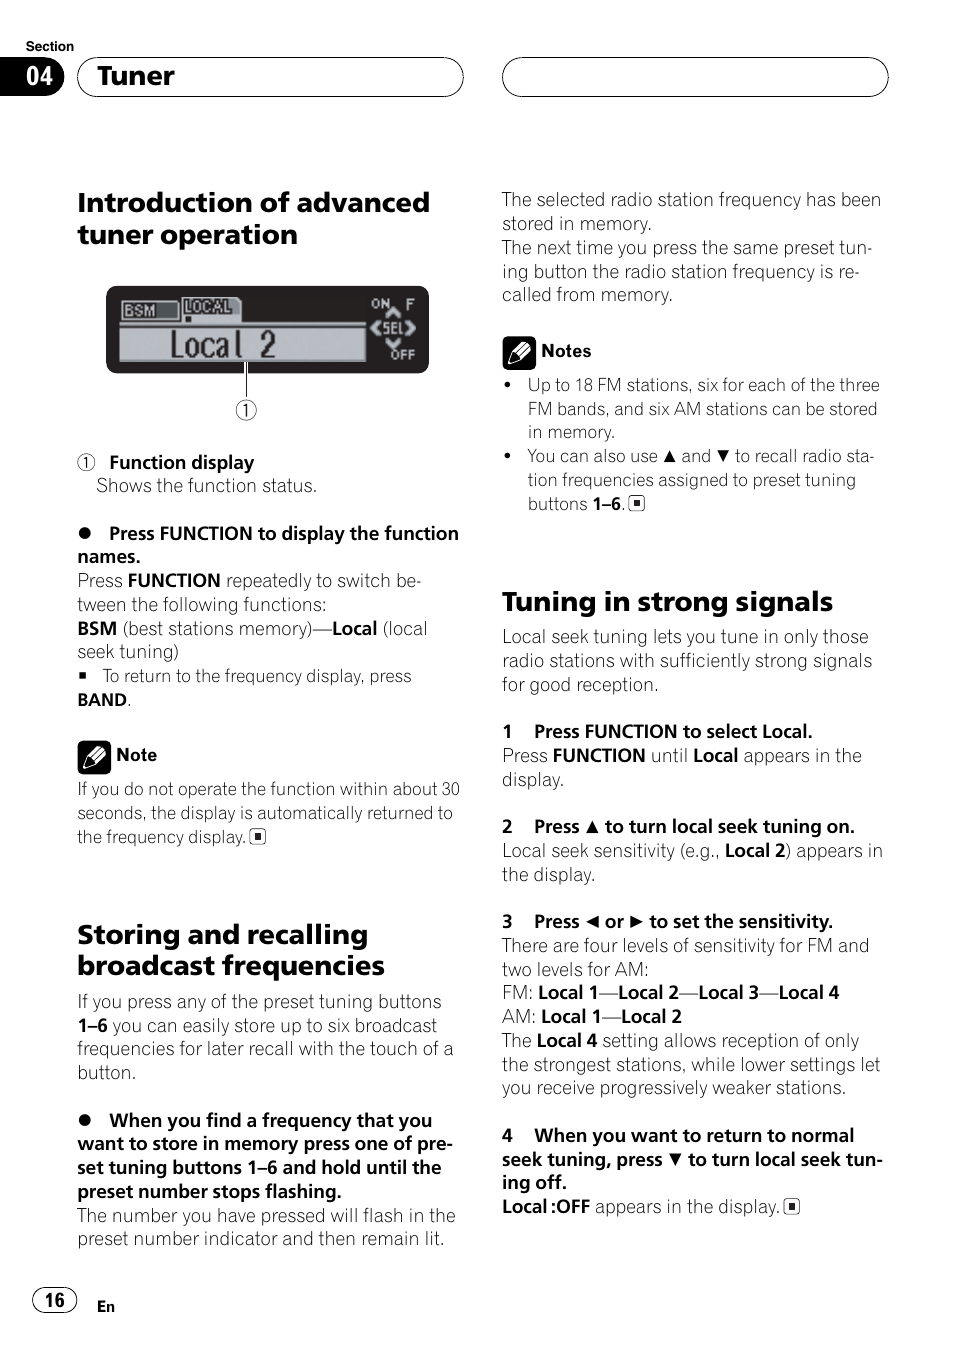 Introduction of advanced tuner, Operation 16, Storing and recalling broadcast | Frequencies 16, Tuning in strong signals 16, Introduction of advanced tuner operation, Storing and recalling broadcast frequencies, Tuning in strong signals, Tuner | Pioneer DEH-P6700MP Manuel d'utilisation | Page 16 / 119